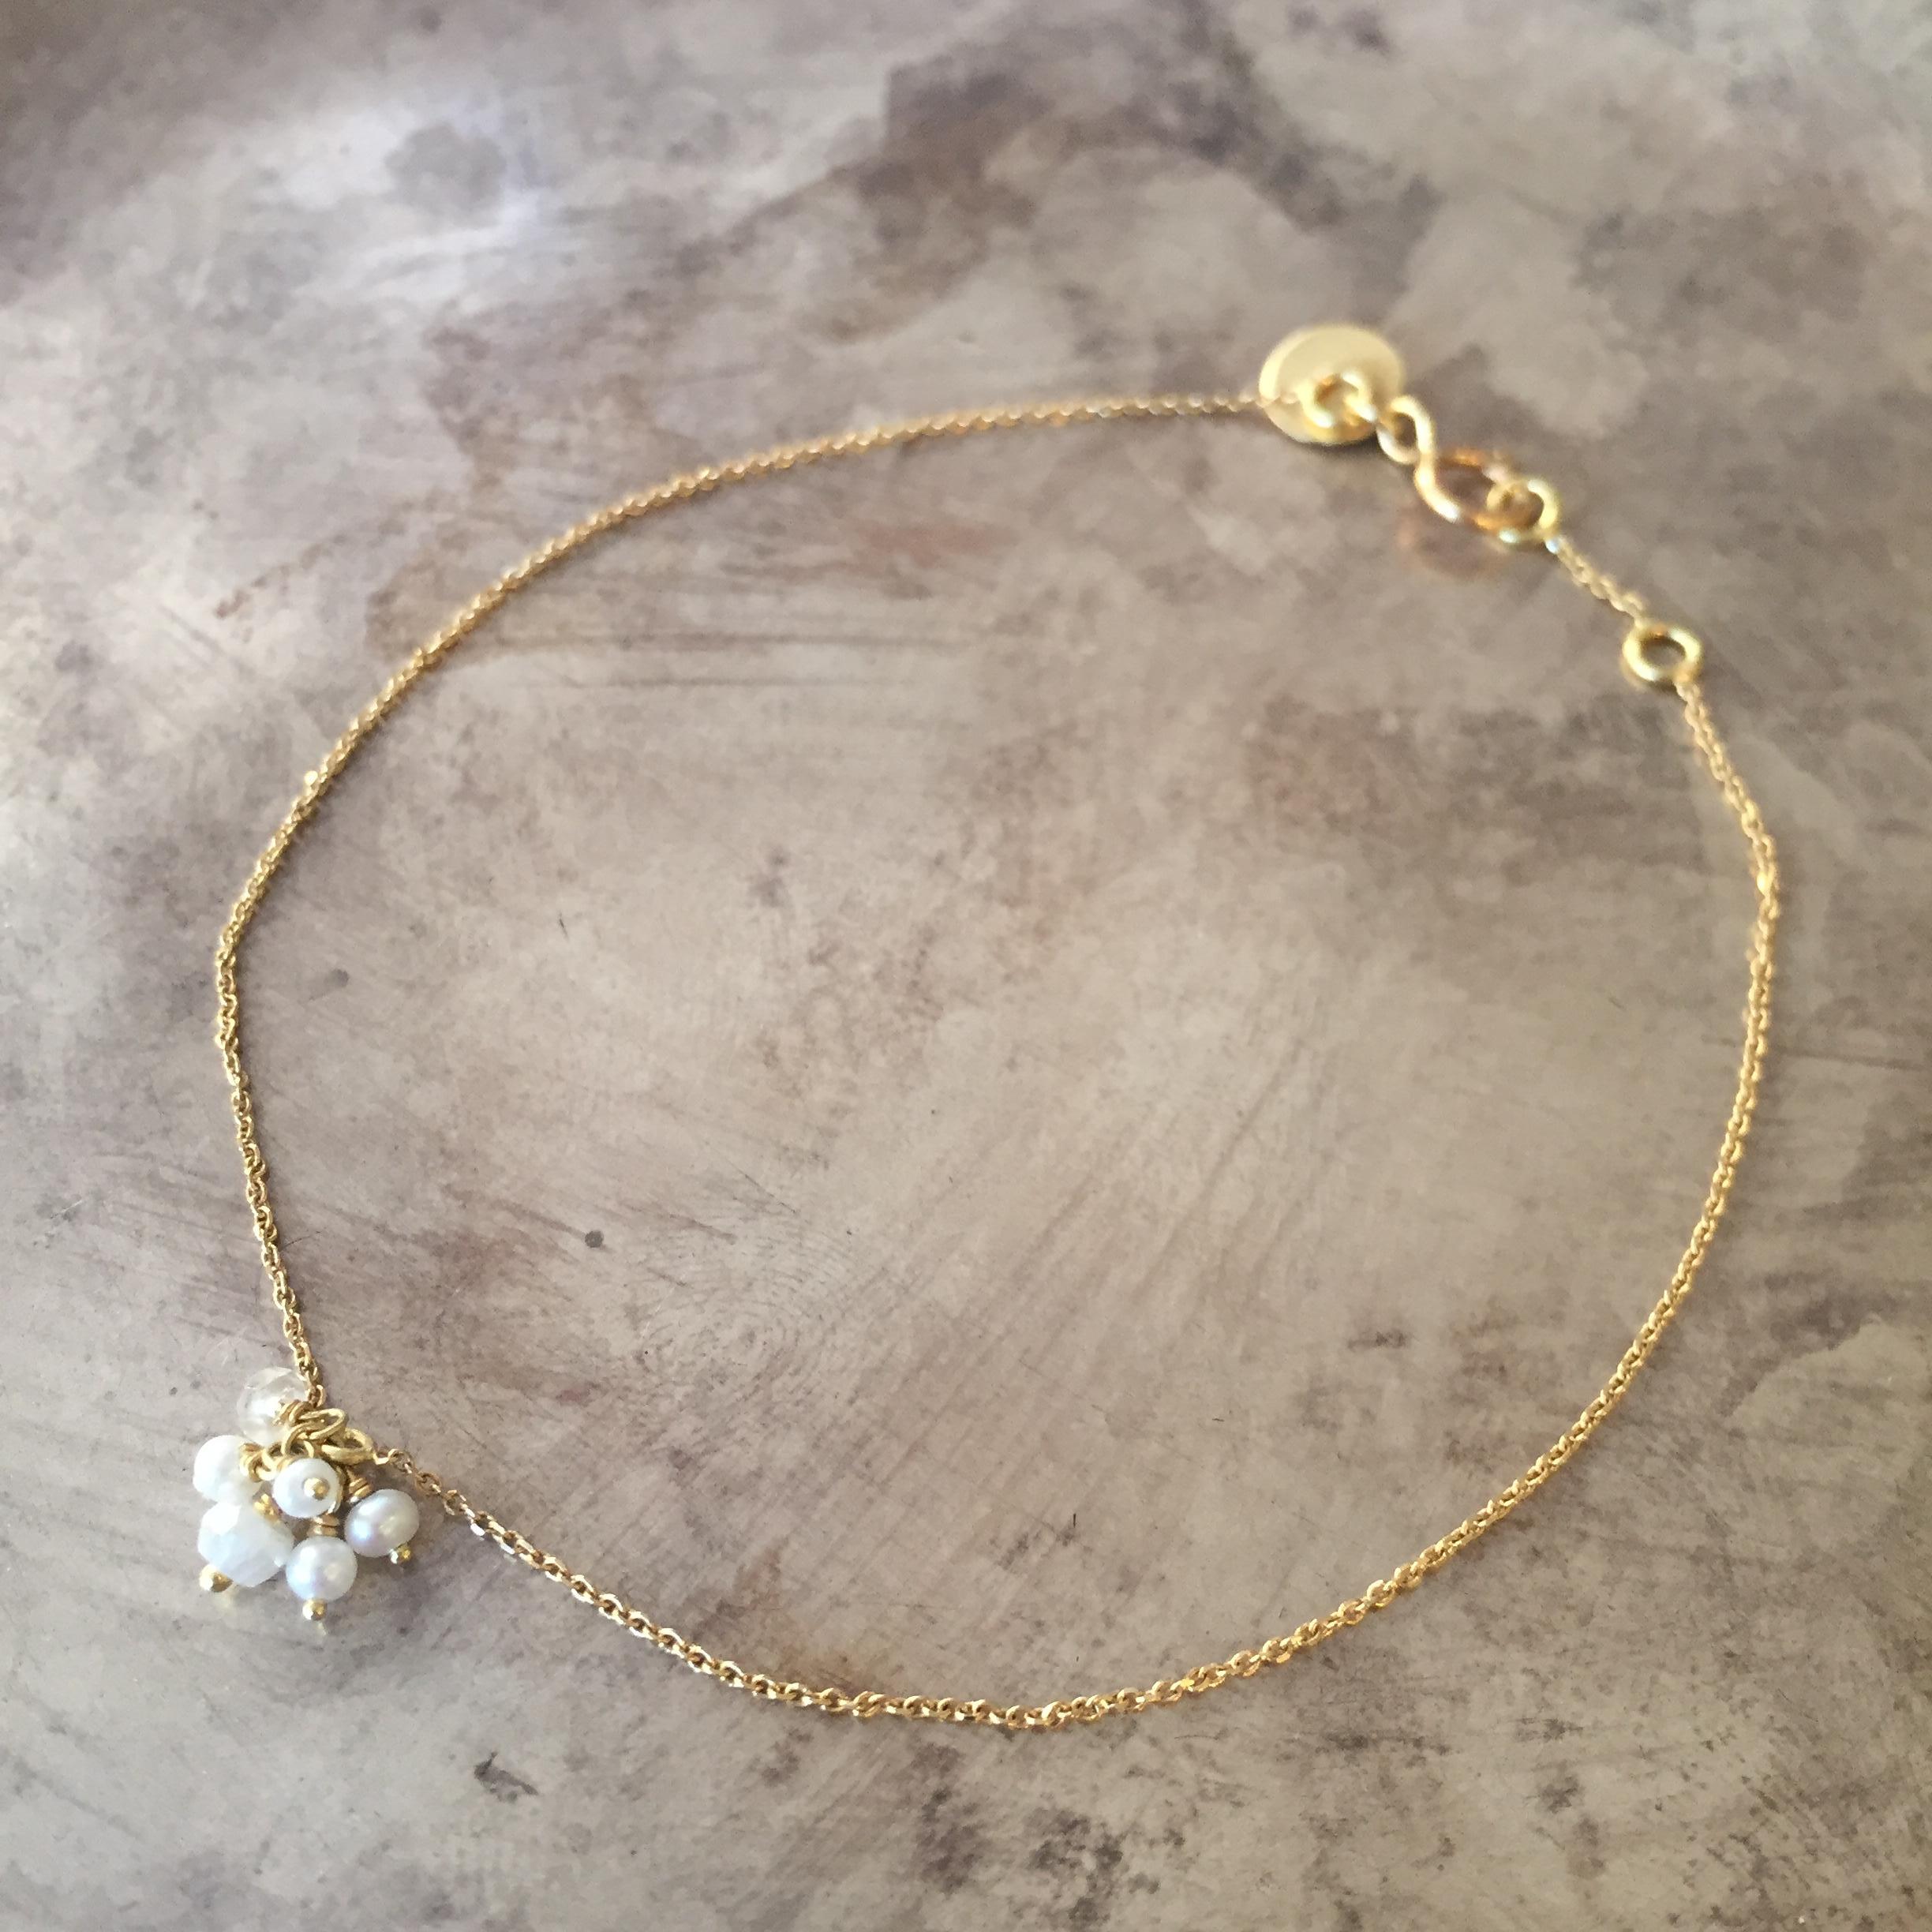 This 18k yellow gold fine chain bracelet has a single cluster of seed pearls and moonstone beads creating a dainty yet eye-catching piece! Made from diamond cut fine 18k chain this bracelet is the perfect addition to anyone's wrist. The total length